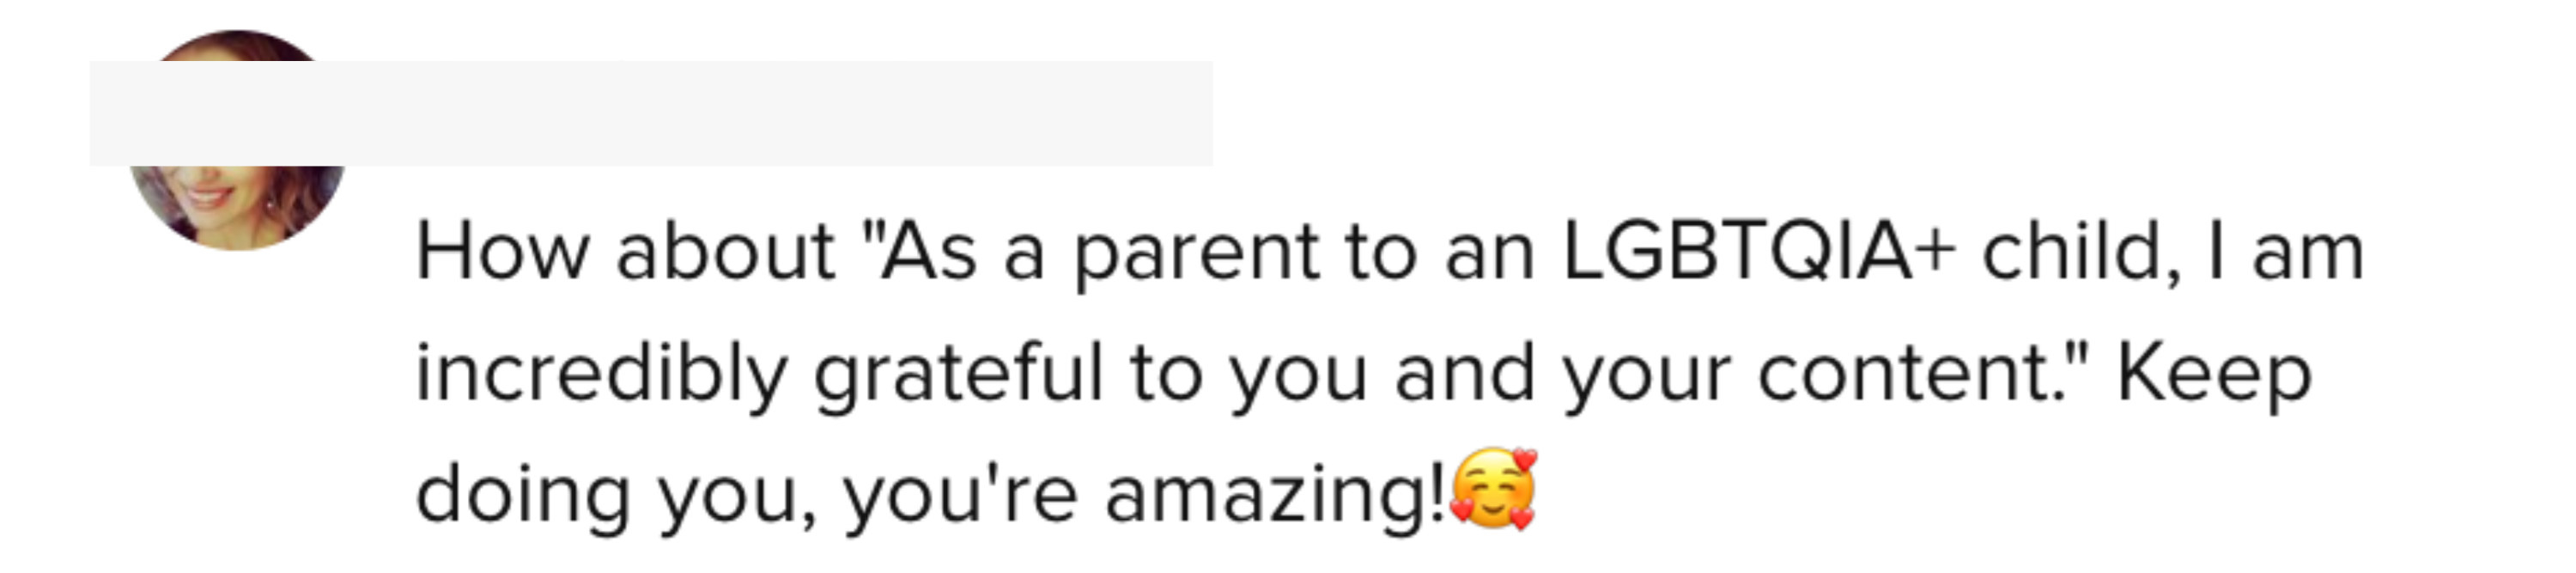 One person said that &quot;As a parent to an LGBTQIA+ child, I am incredibly grateful to you and your content&quot;